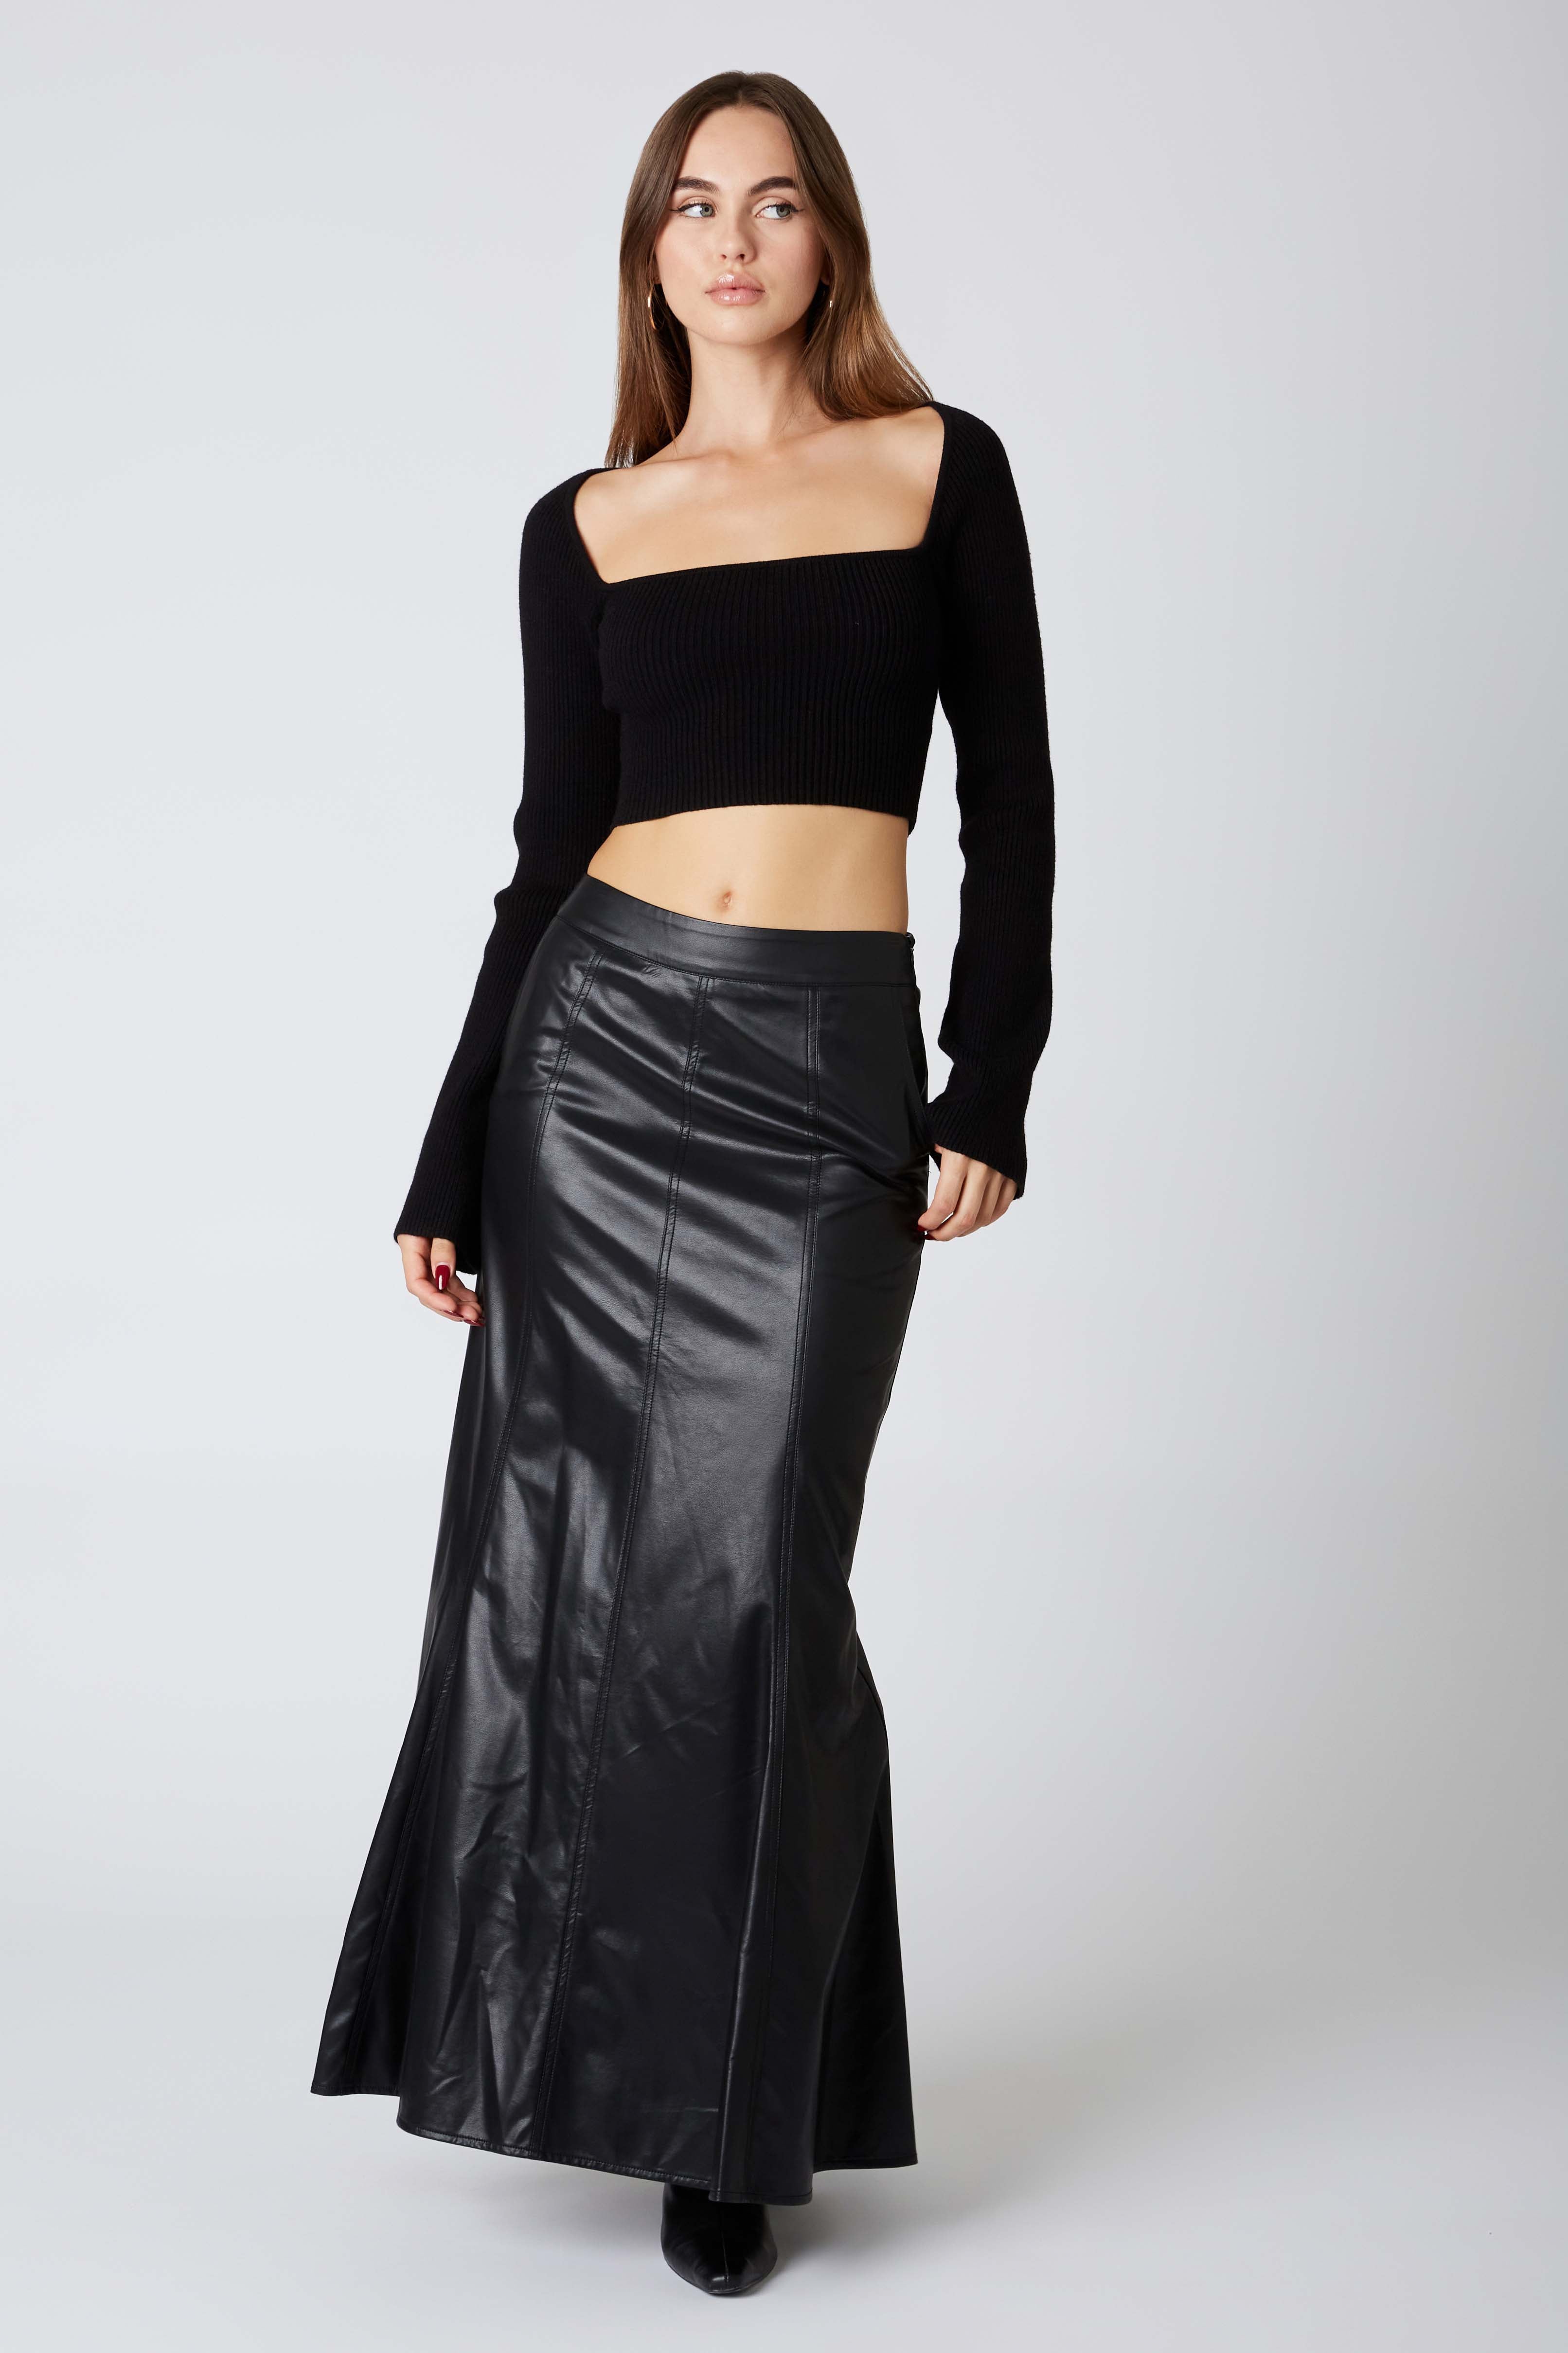 Leather Maxi Skirt in Black Front View